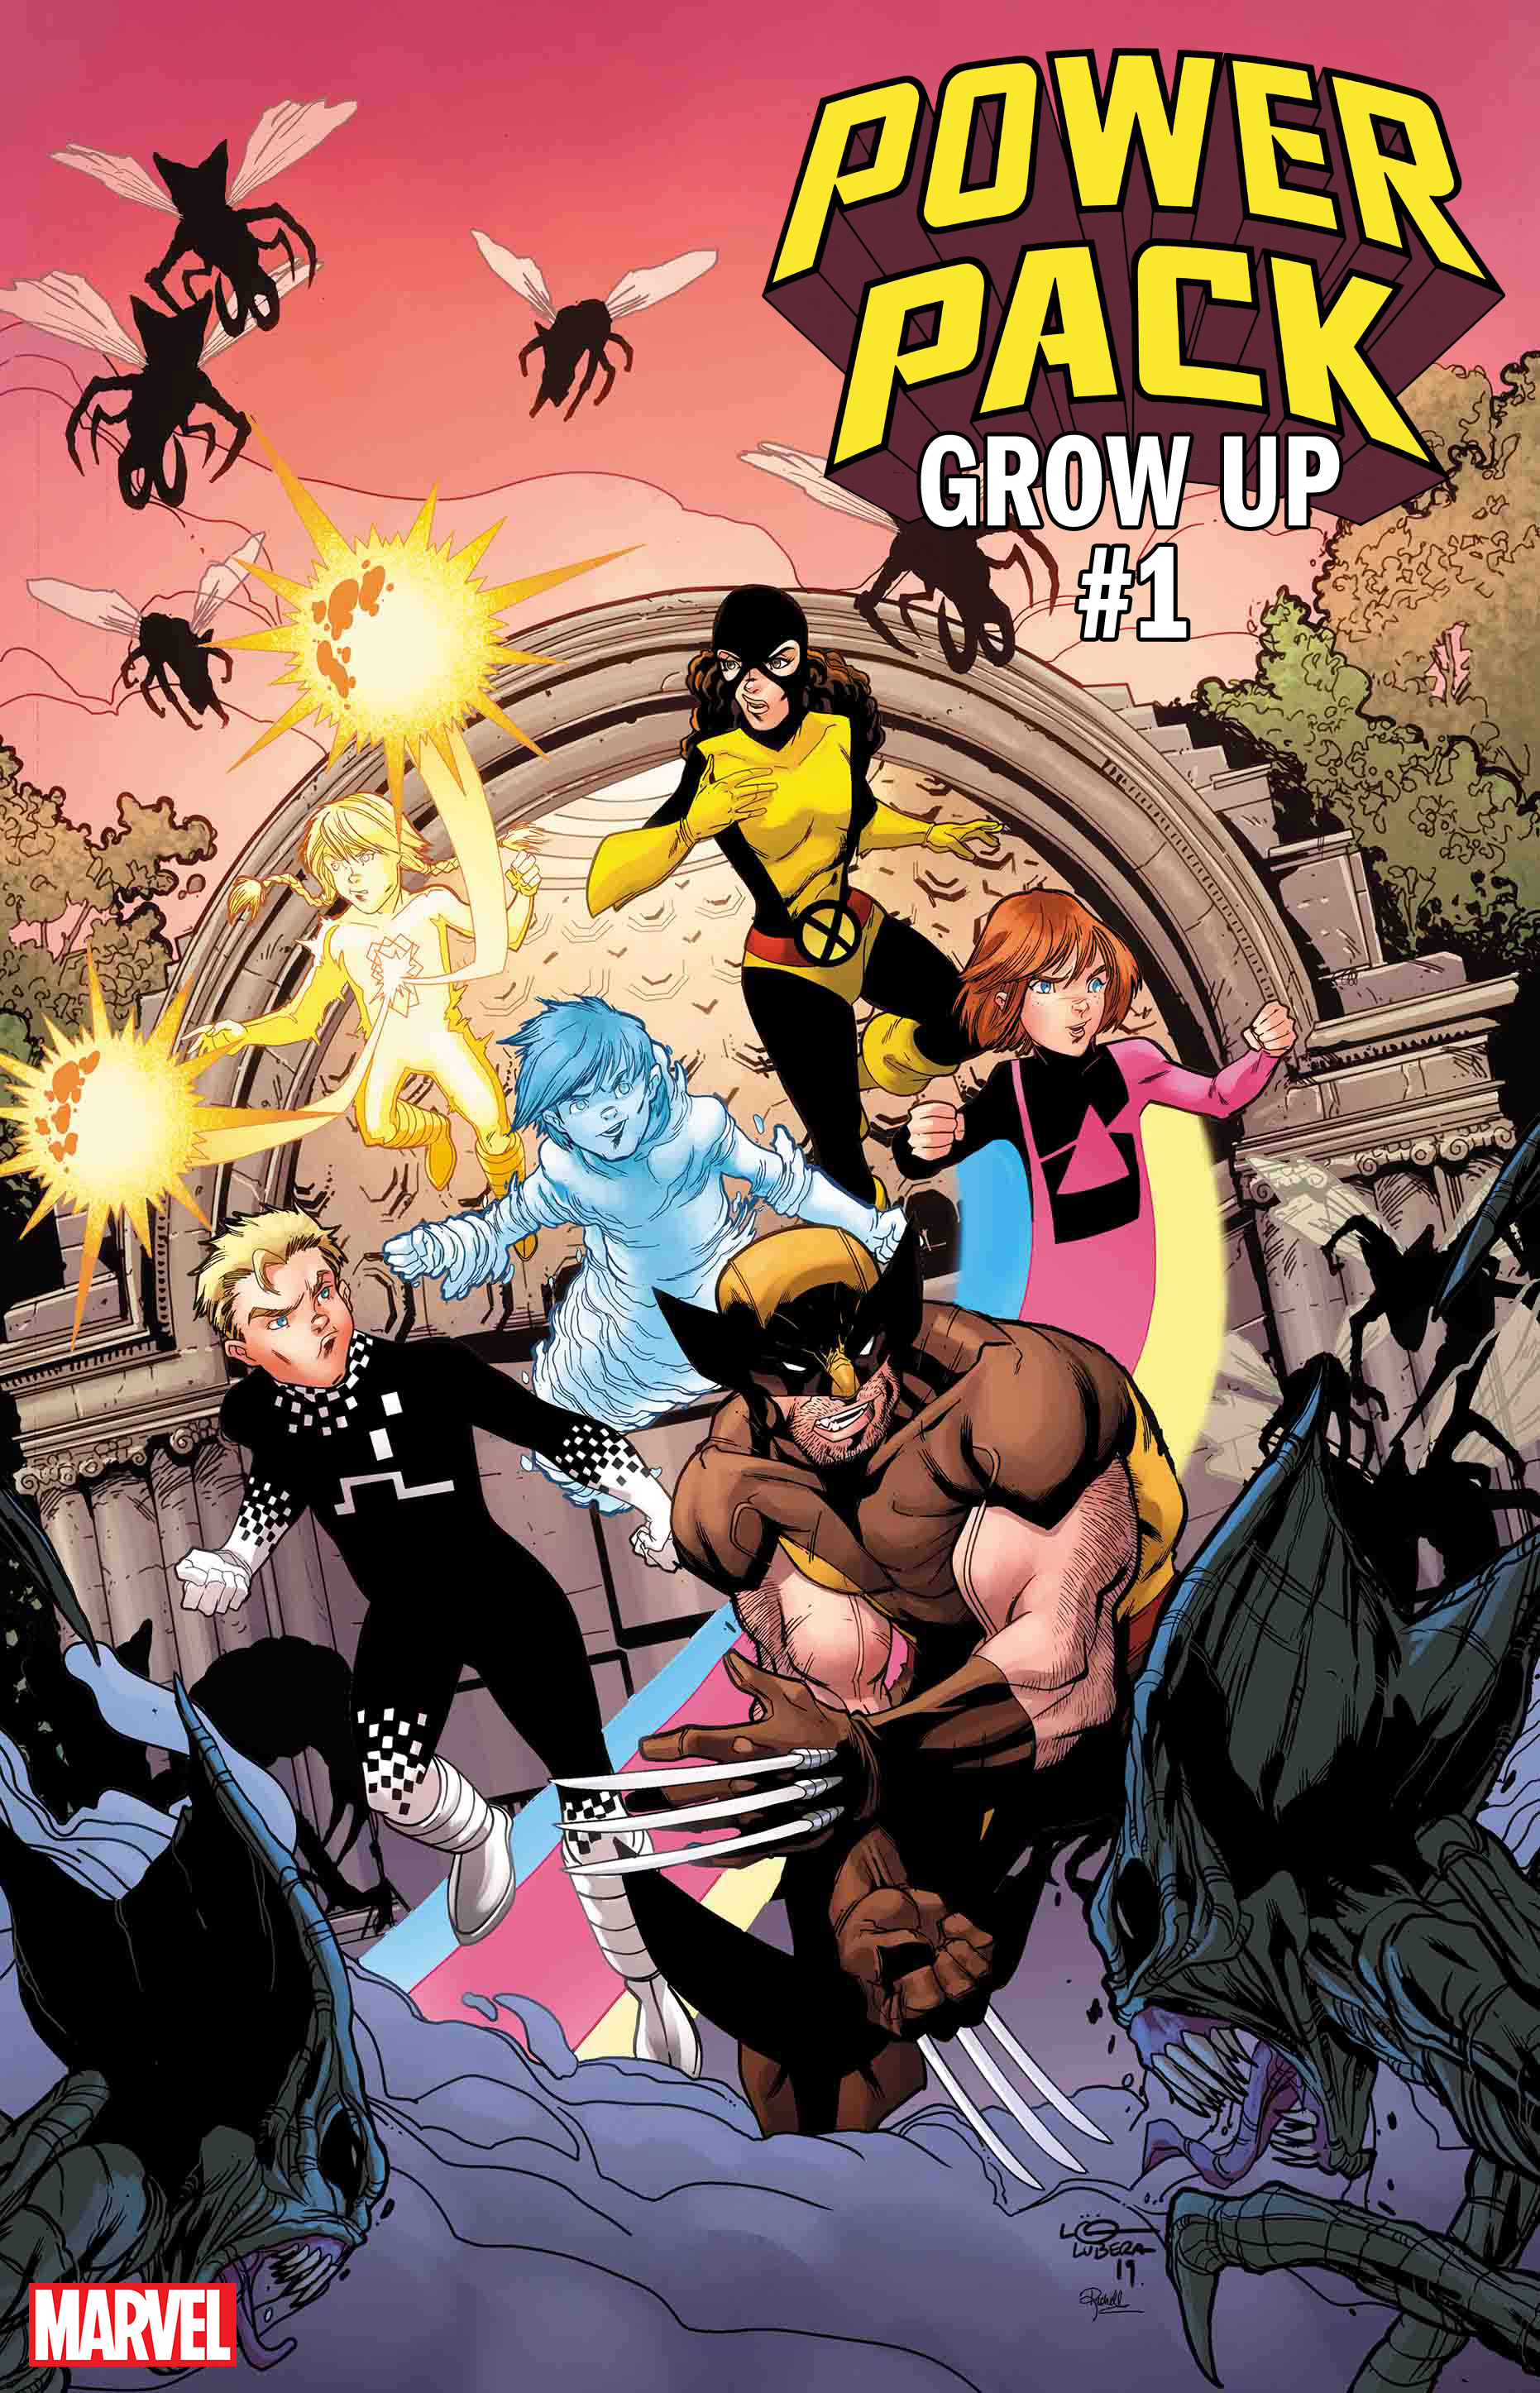 Marvel reveals new Power Pack series Grow Up out this August